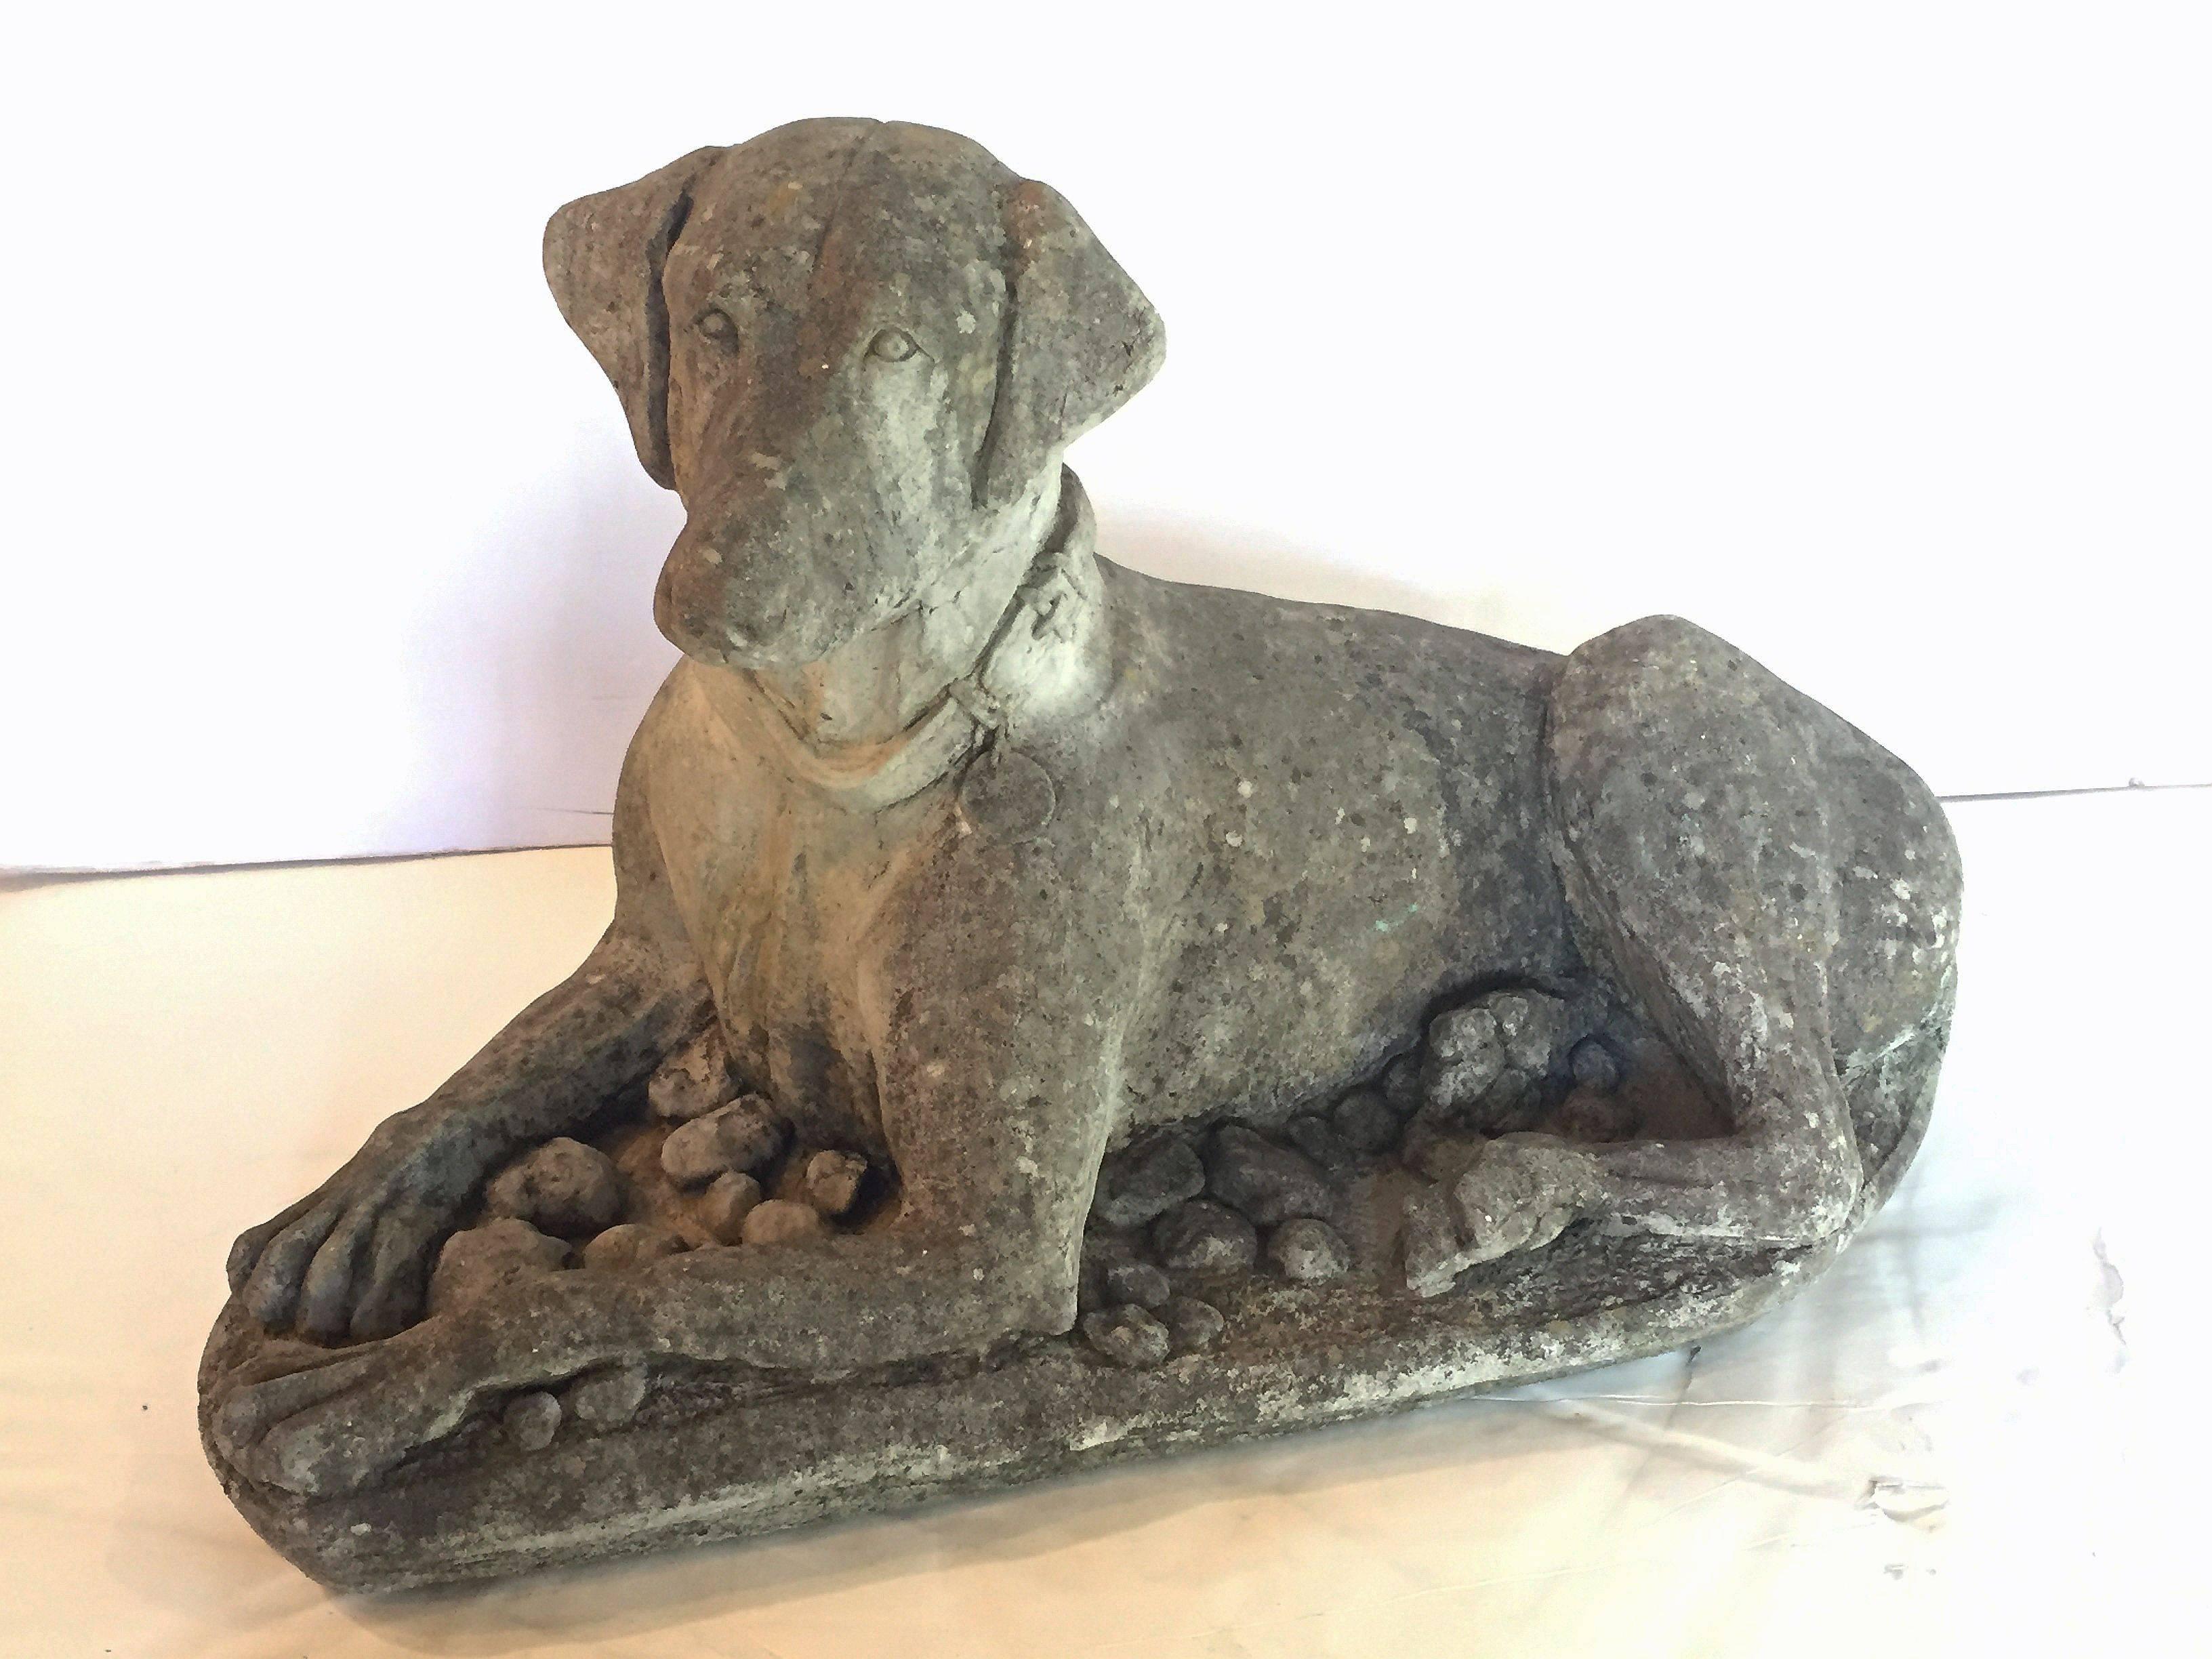 A handsome large English garden stone dog featuring a Labrador in a reclining or recumbent pose with a collar around his neck.

Perfect for a garden room or conservatory!